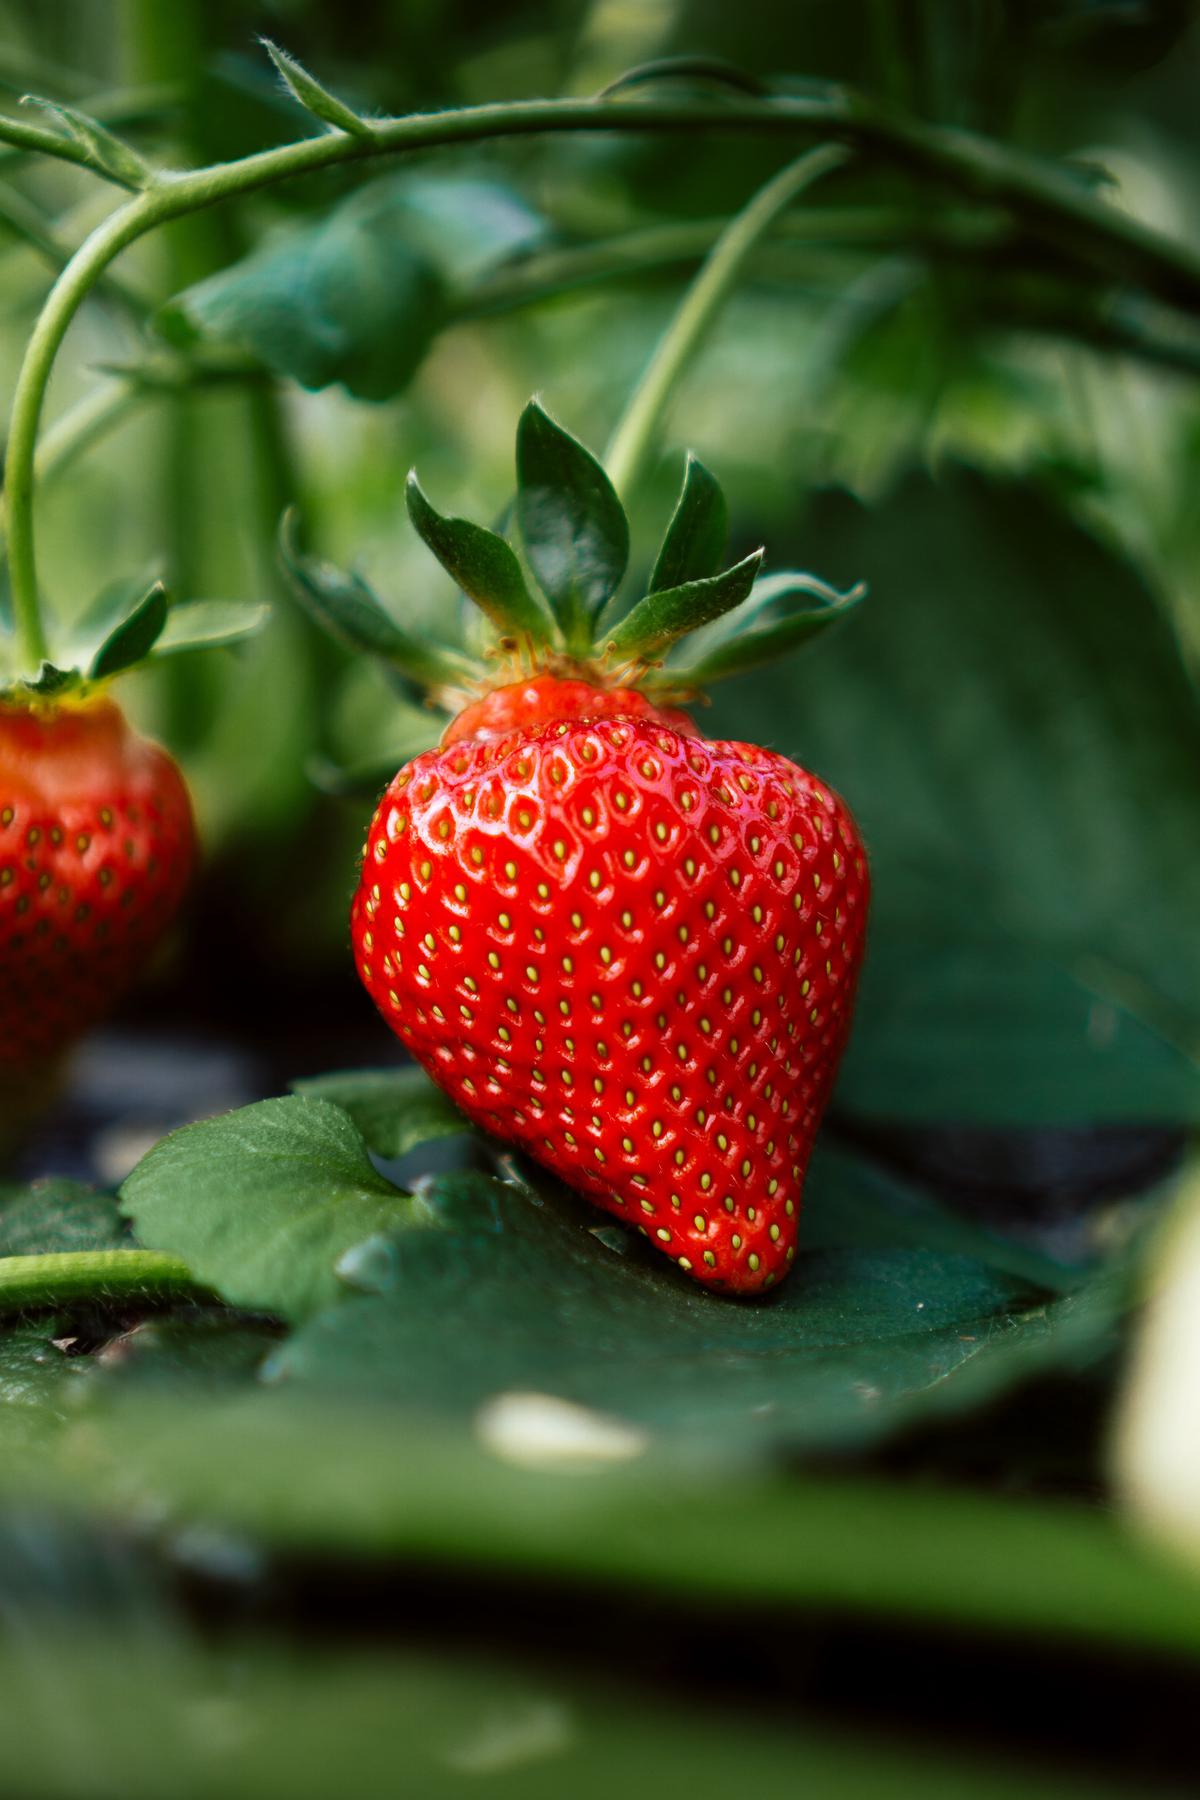 Image illustrating the botanical view of a strawberry as an accessory fruit.